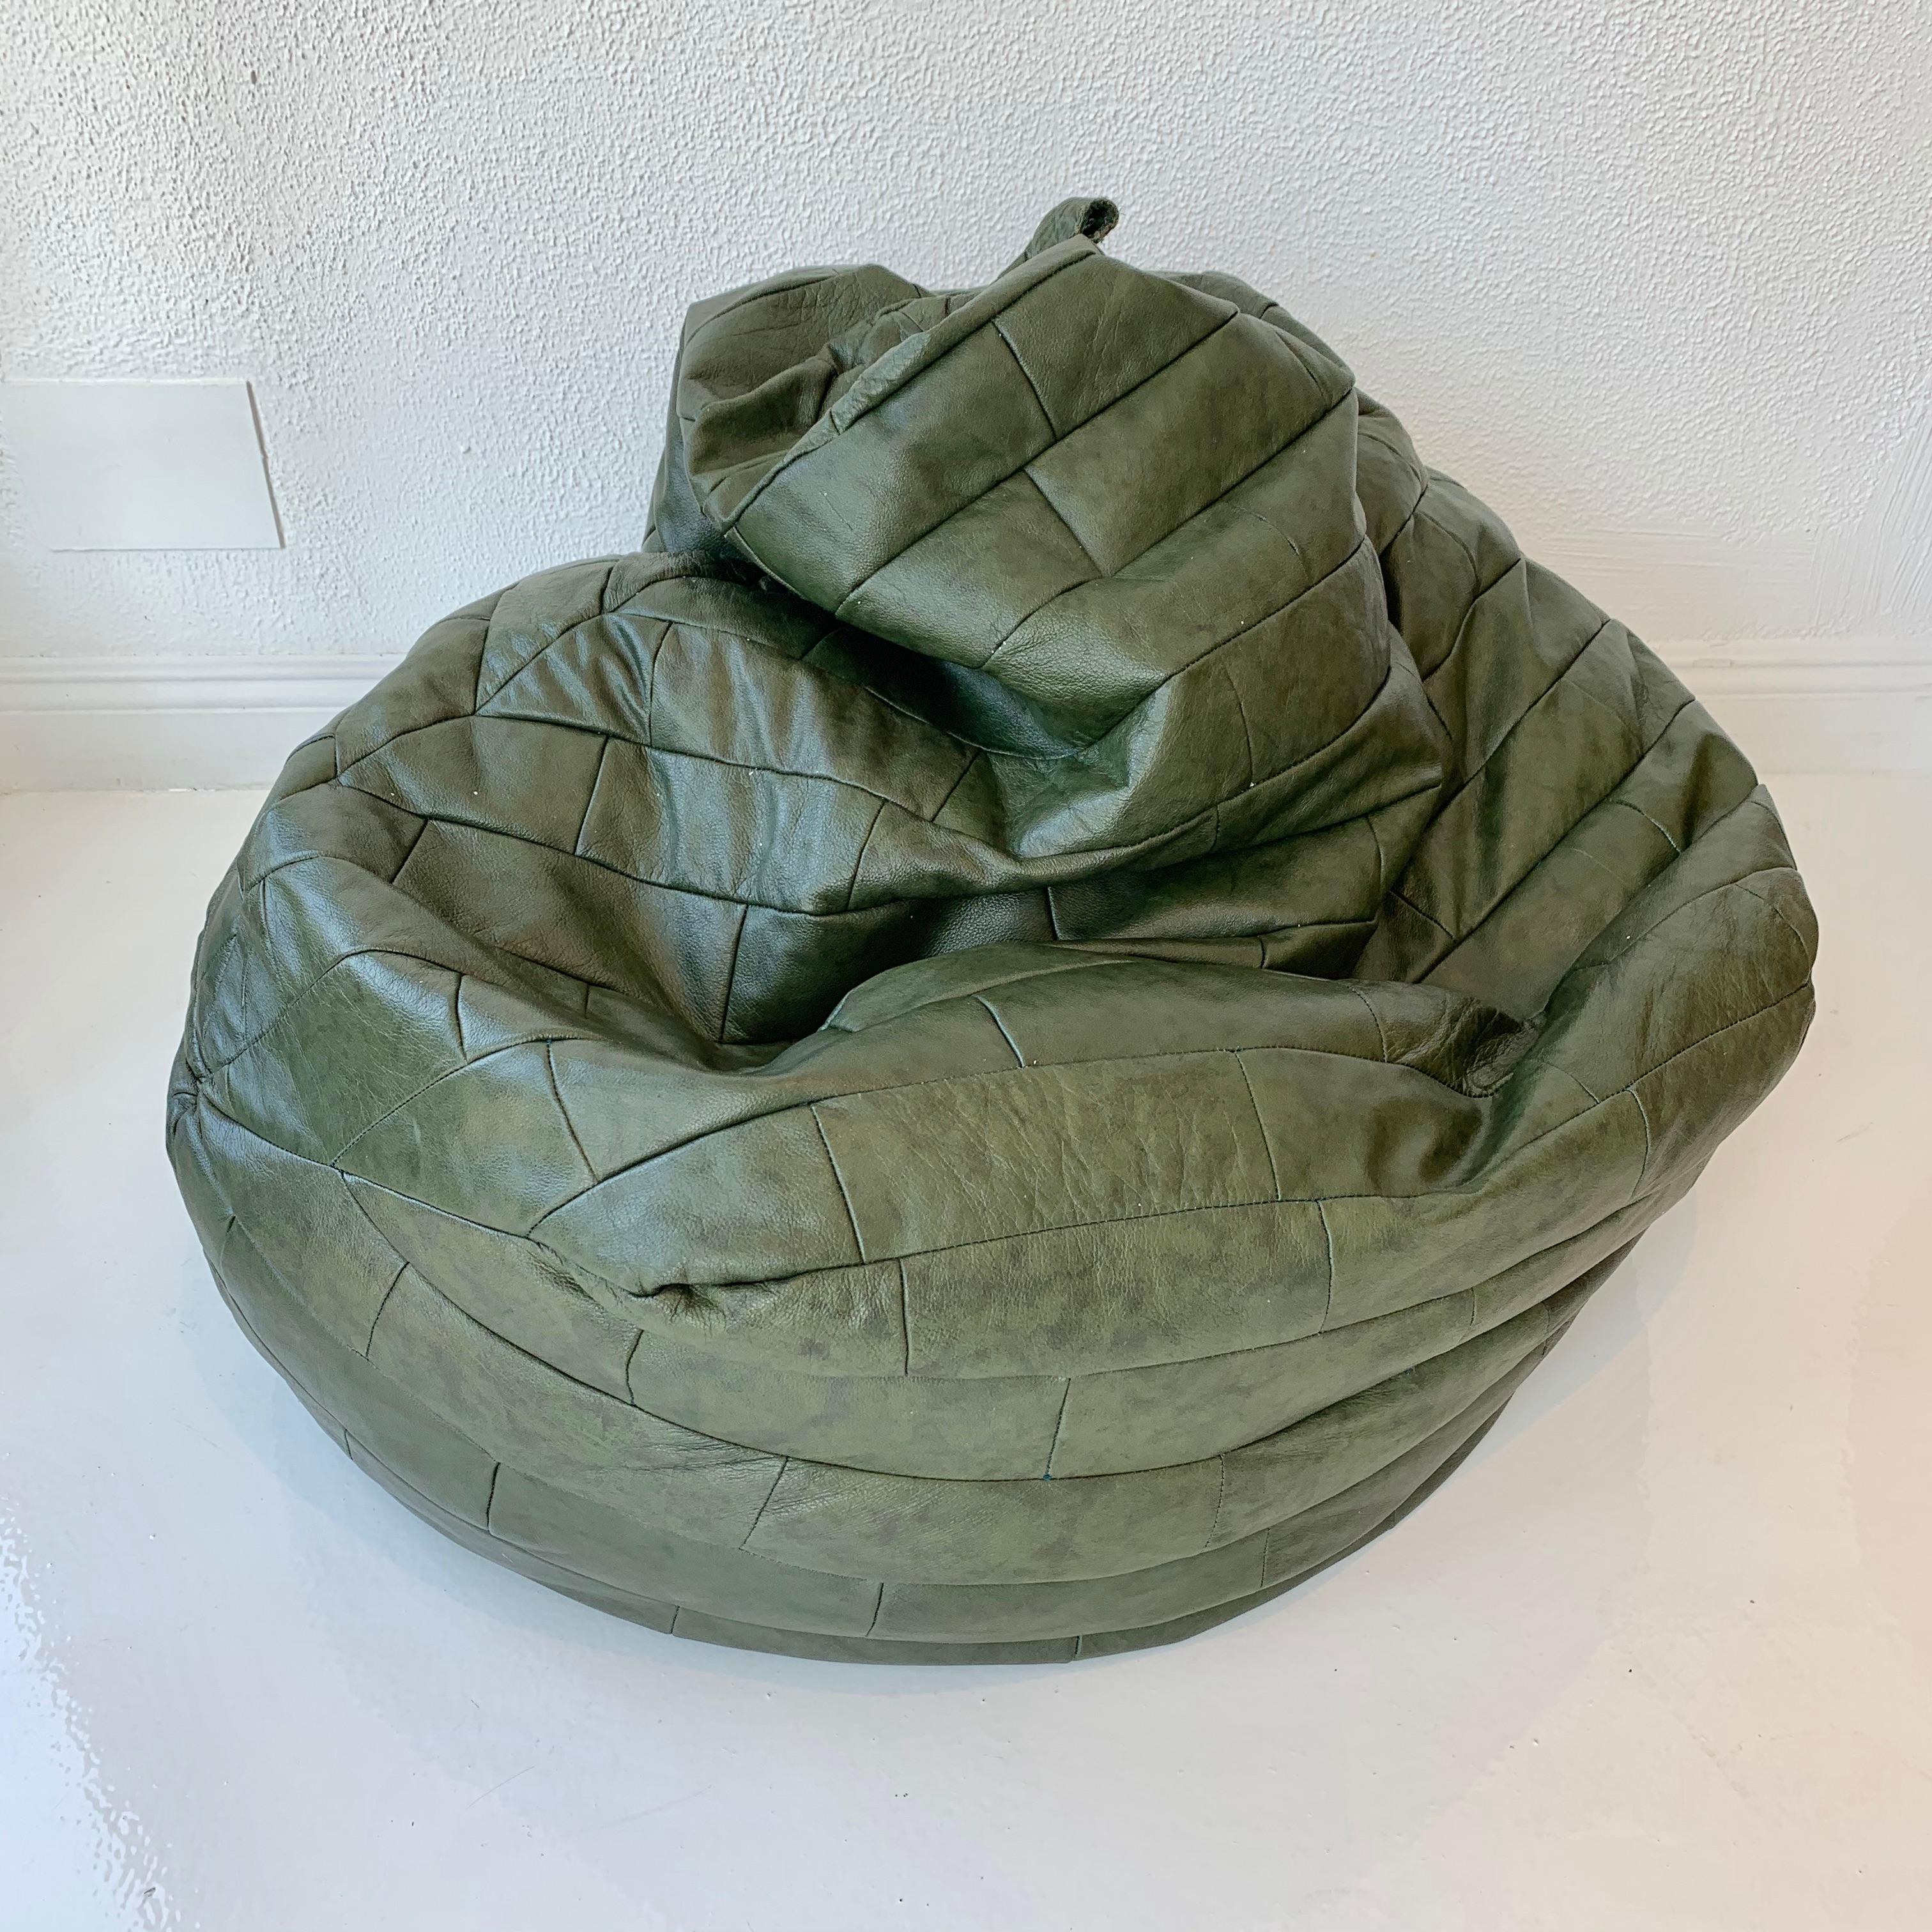 Gorgeous Army green leather patchwork bean bag by De Sede. Great coloring and patina to leather. Very good condition. Extremely comfortable. Fun accent piece.

5 other De Sede patchwork bean bags available in different colors. Shown in additional